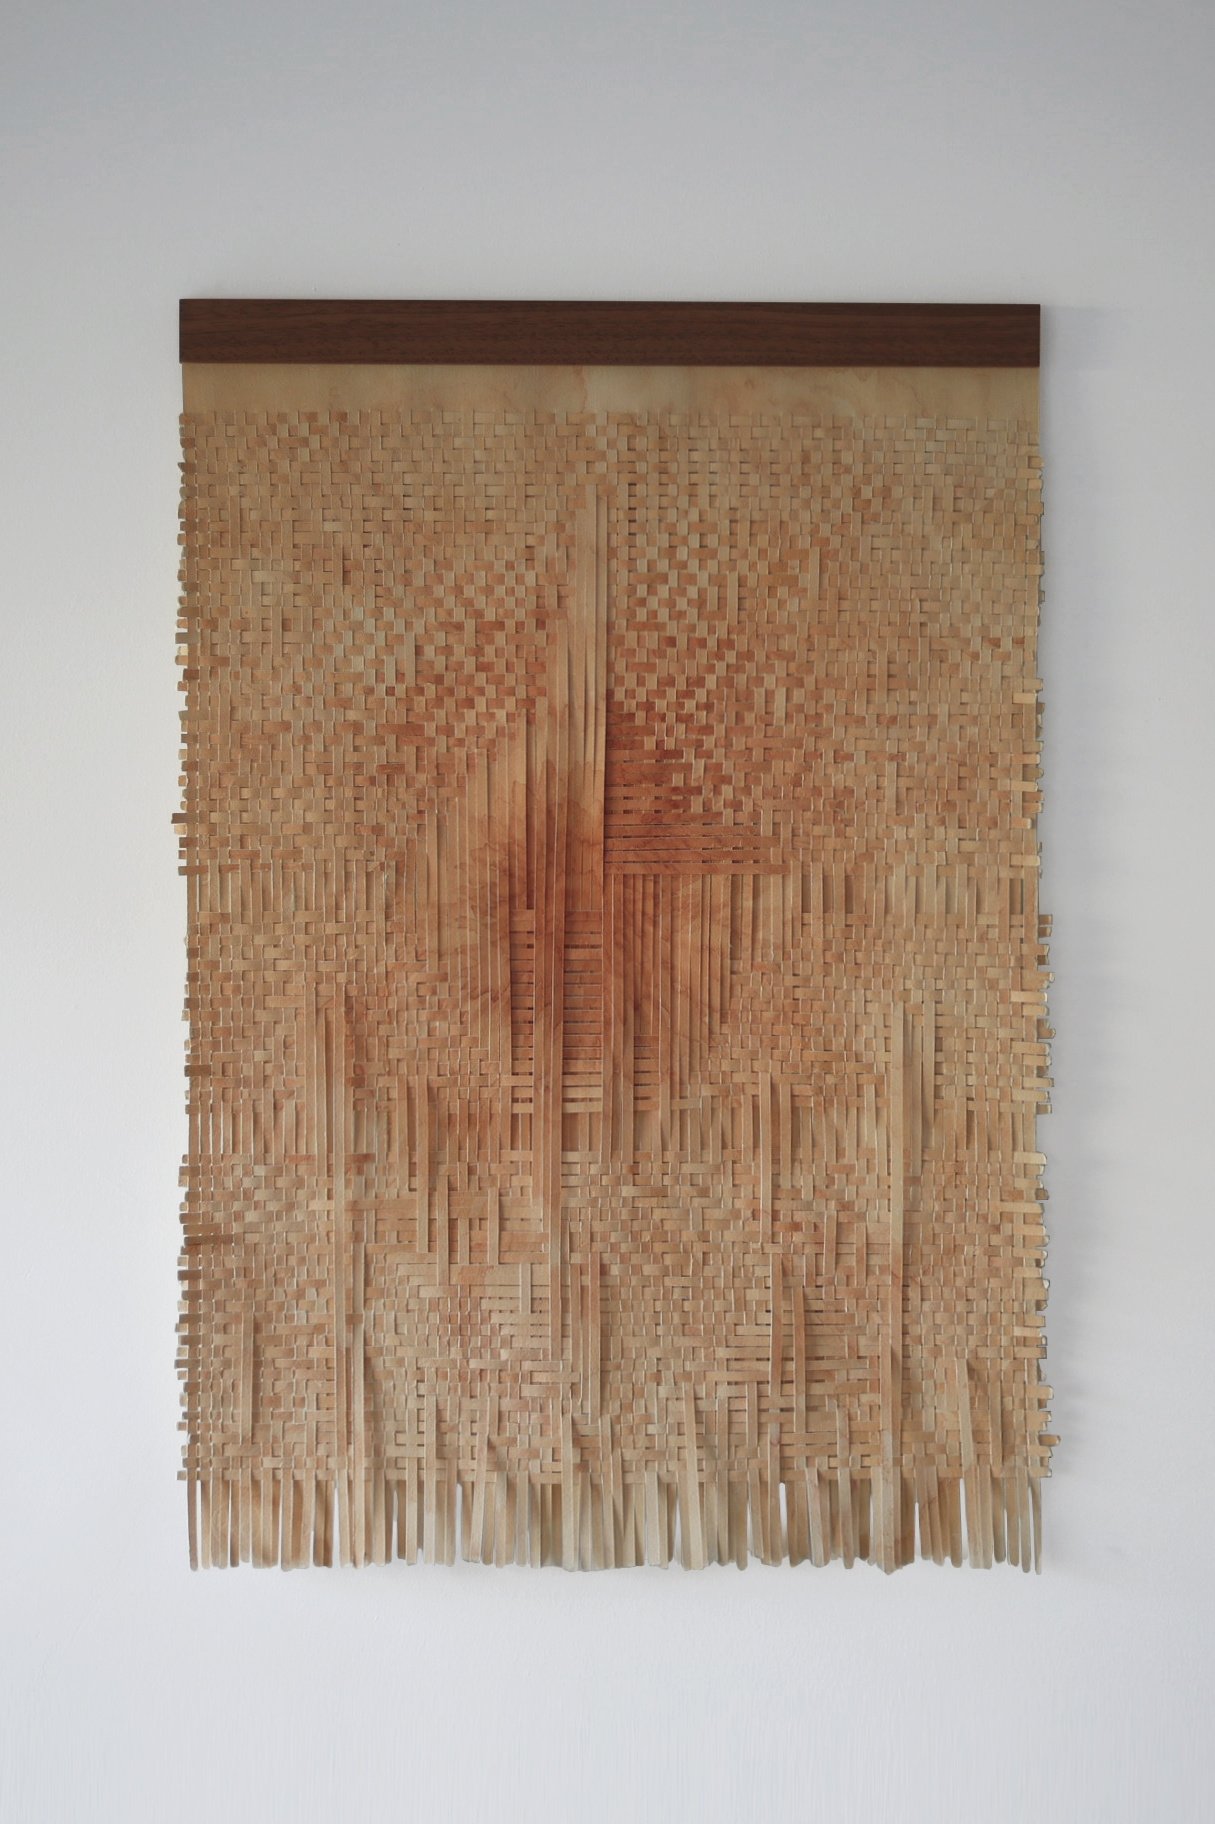 'Solar 02,' 2021, woven painting, cotton paper, natural ink from avocado pits and skins, 53 by 78 centimeters. (Courtesy of Aslı Smith)